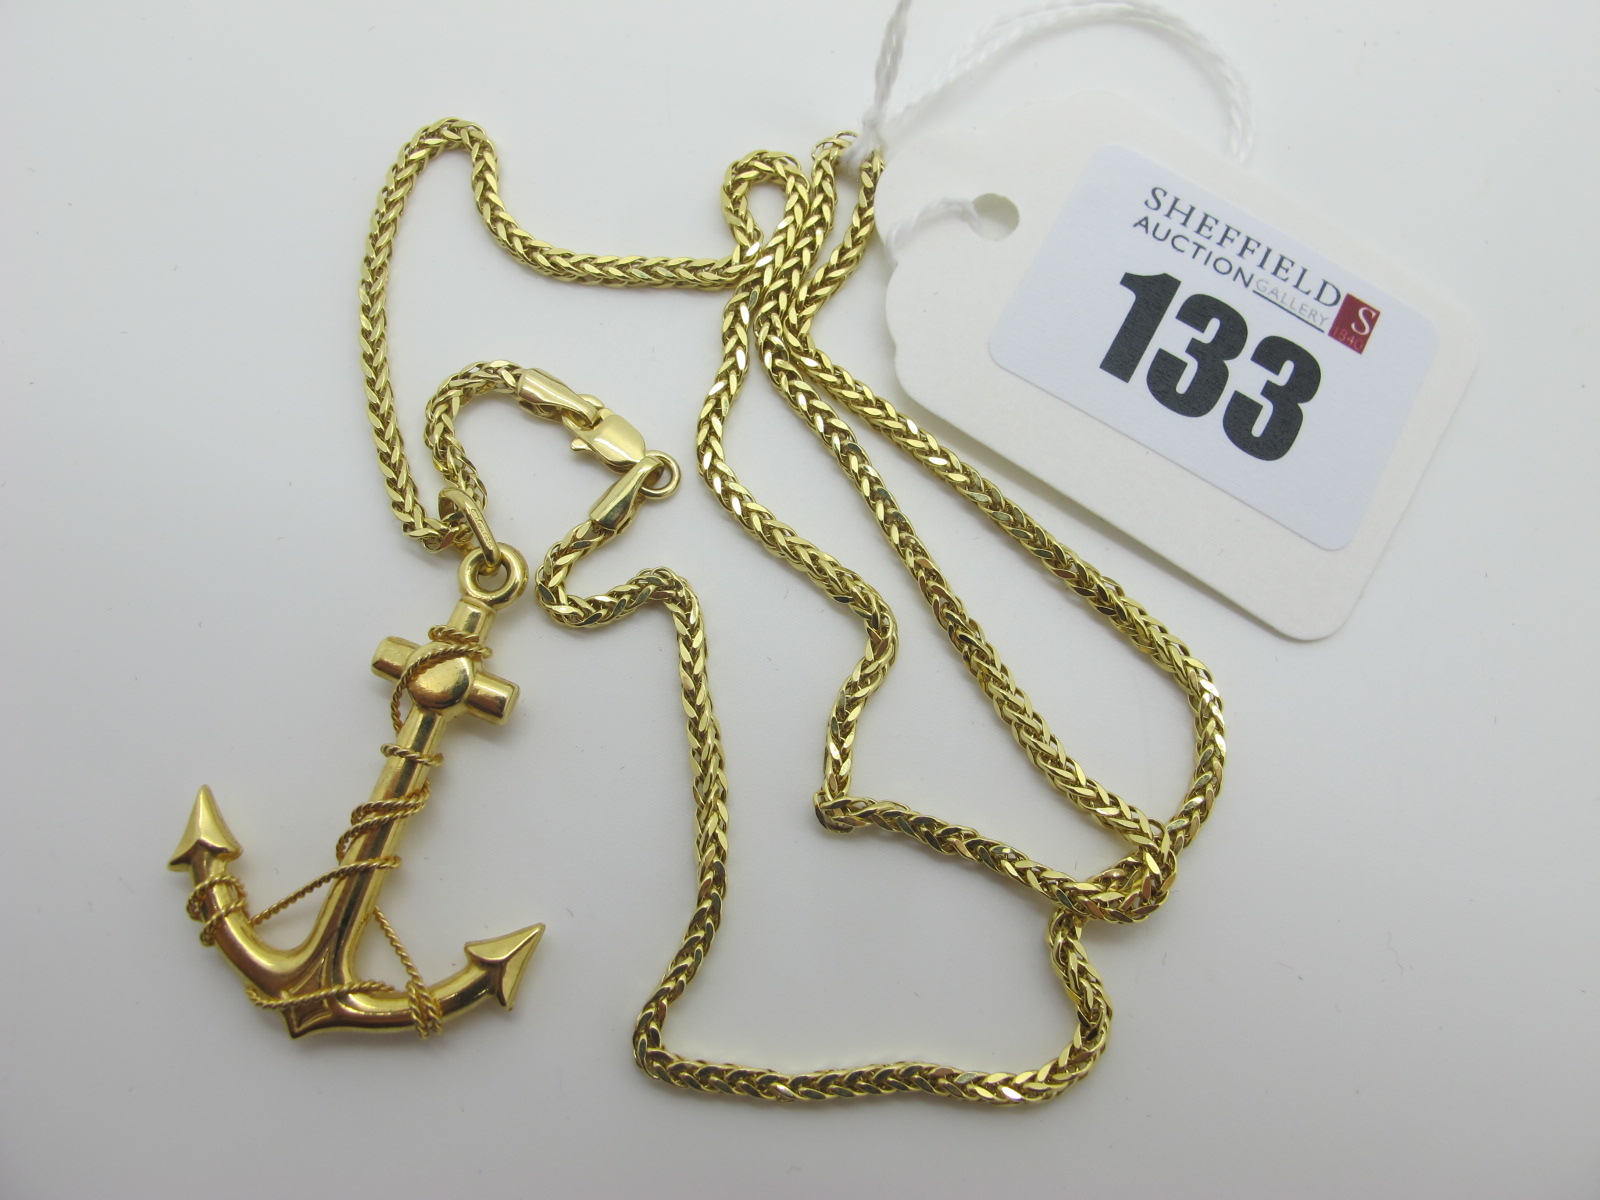 A Modern 9ct Gold Fancy Link Chain, suspending an anchor pendant, stamped "375" (4.7grams).